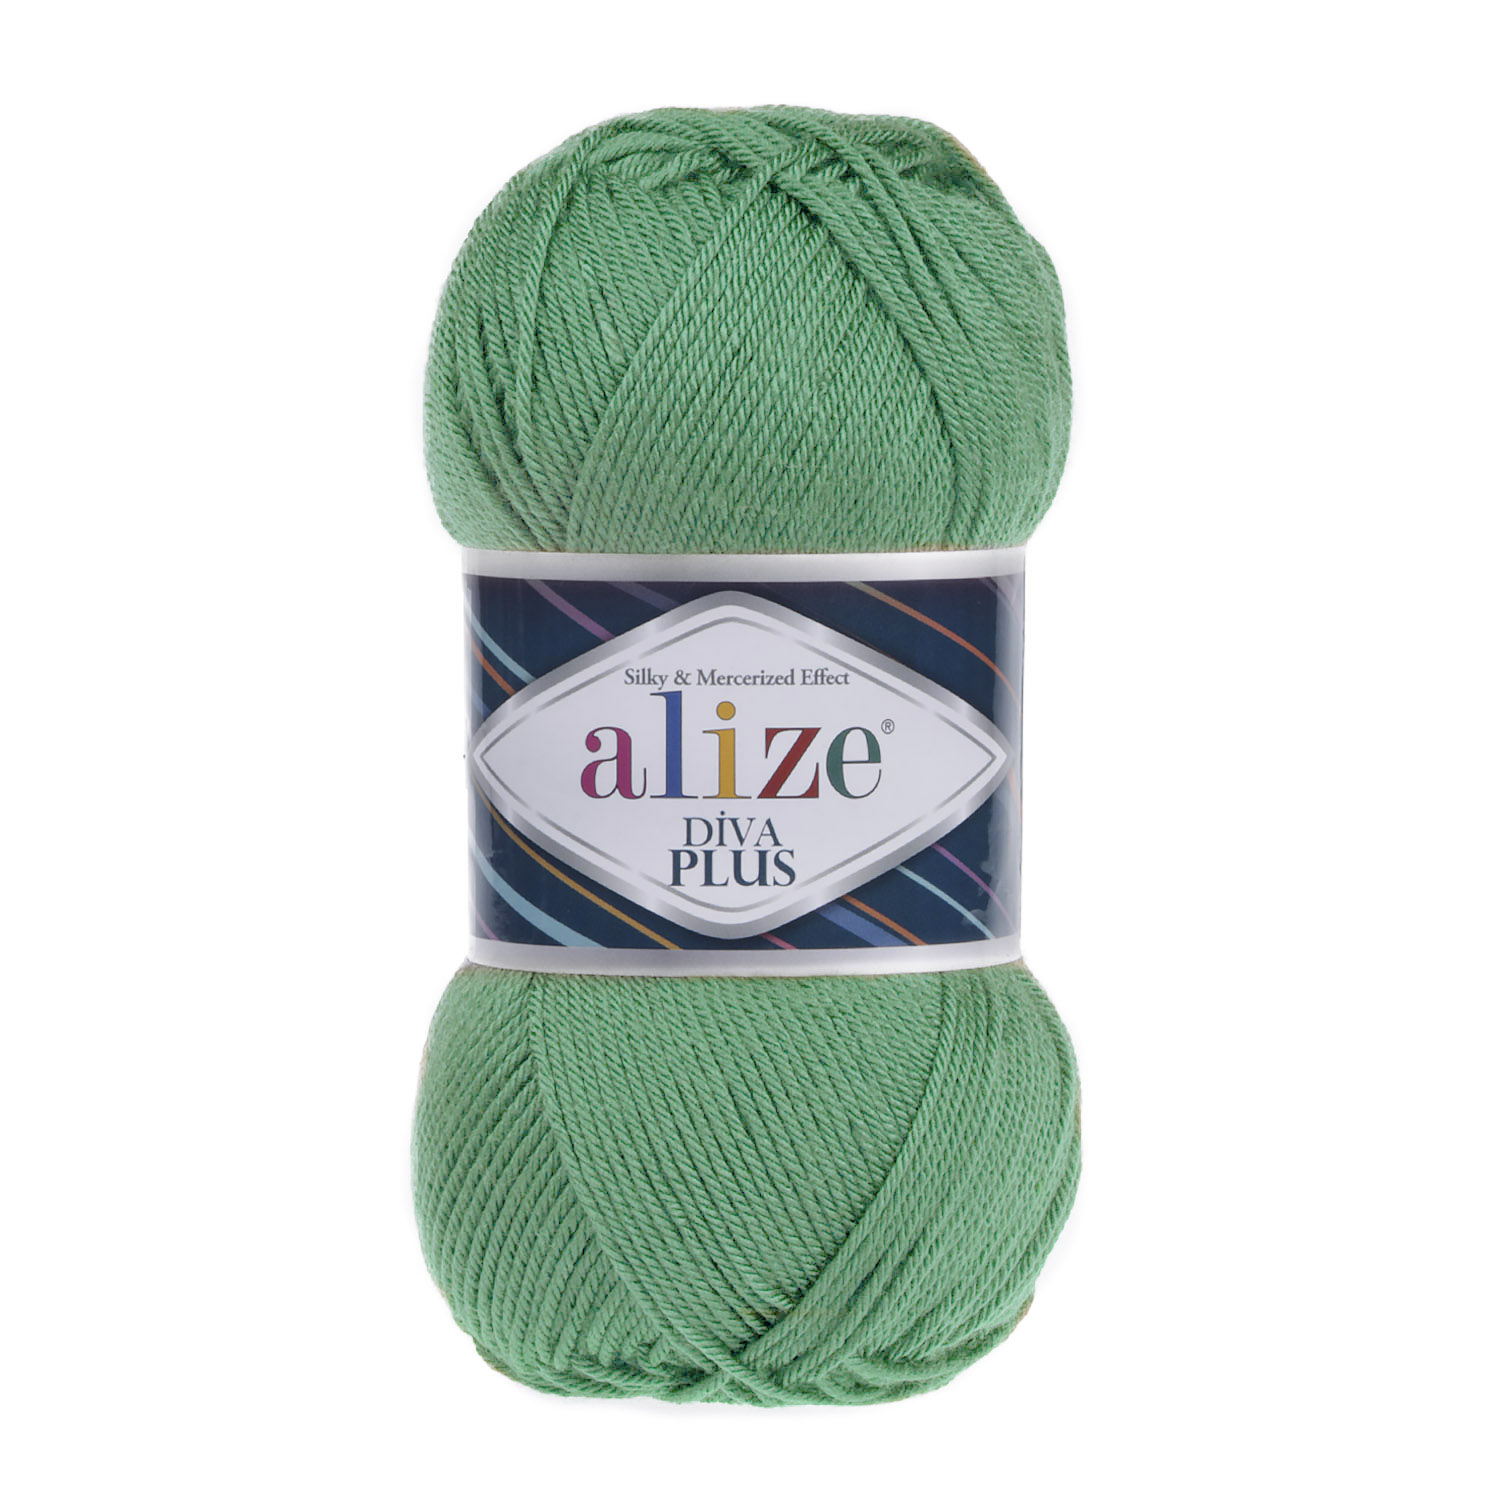 Buy ALIZE DIVA PLUS From ALIZE Online